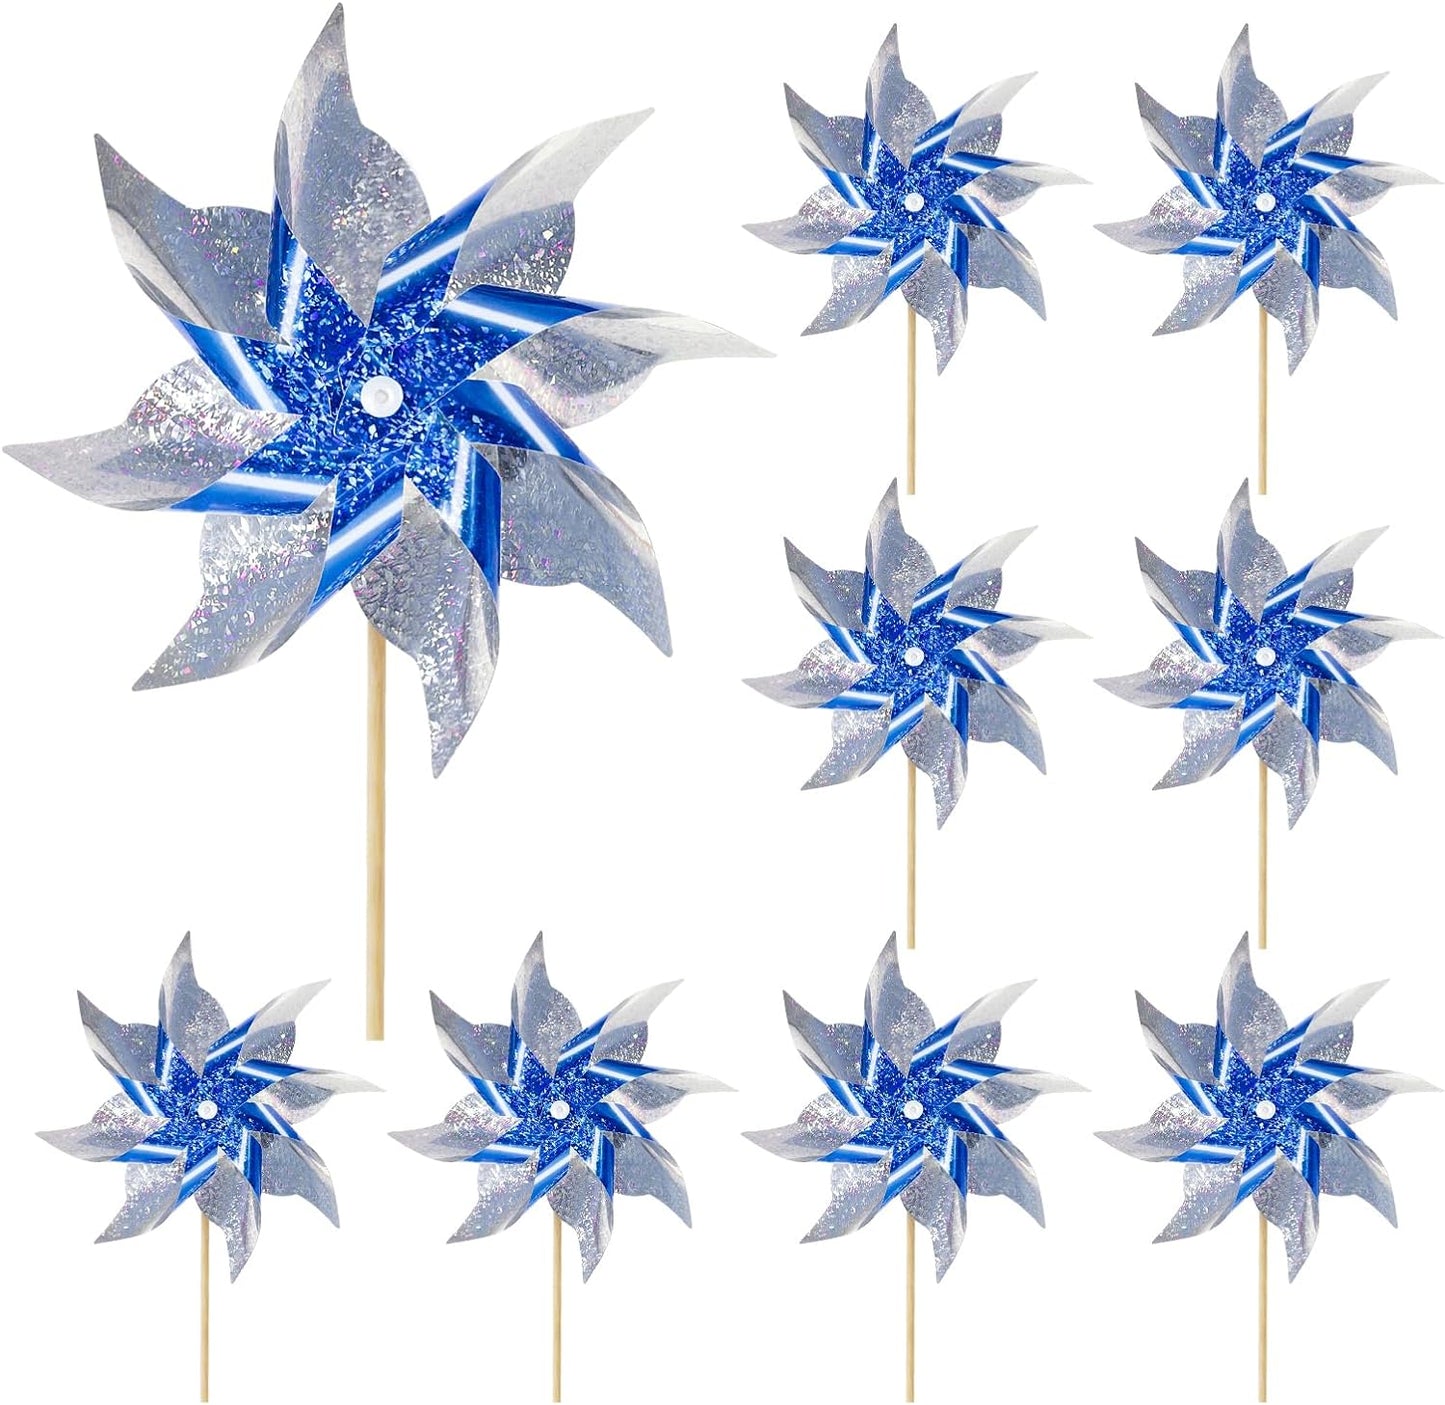 Wind Spinners Outdoor, 12Pcs American Flag Patriotic Pinwheels Red White and Blue Decorations, Garden Wind Spinners Patriotic Outdoor Decor Windmills for Yard Garden, Party Supplies, Memorial Day